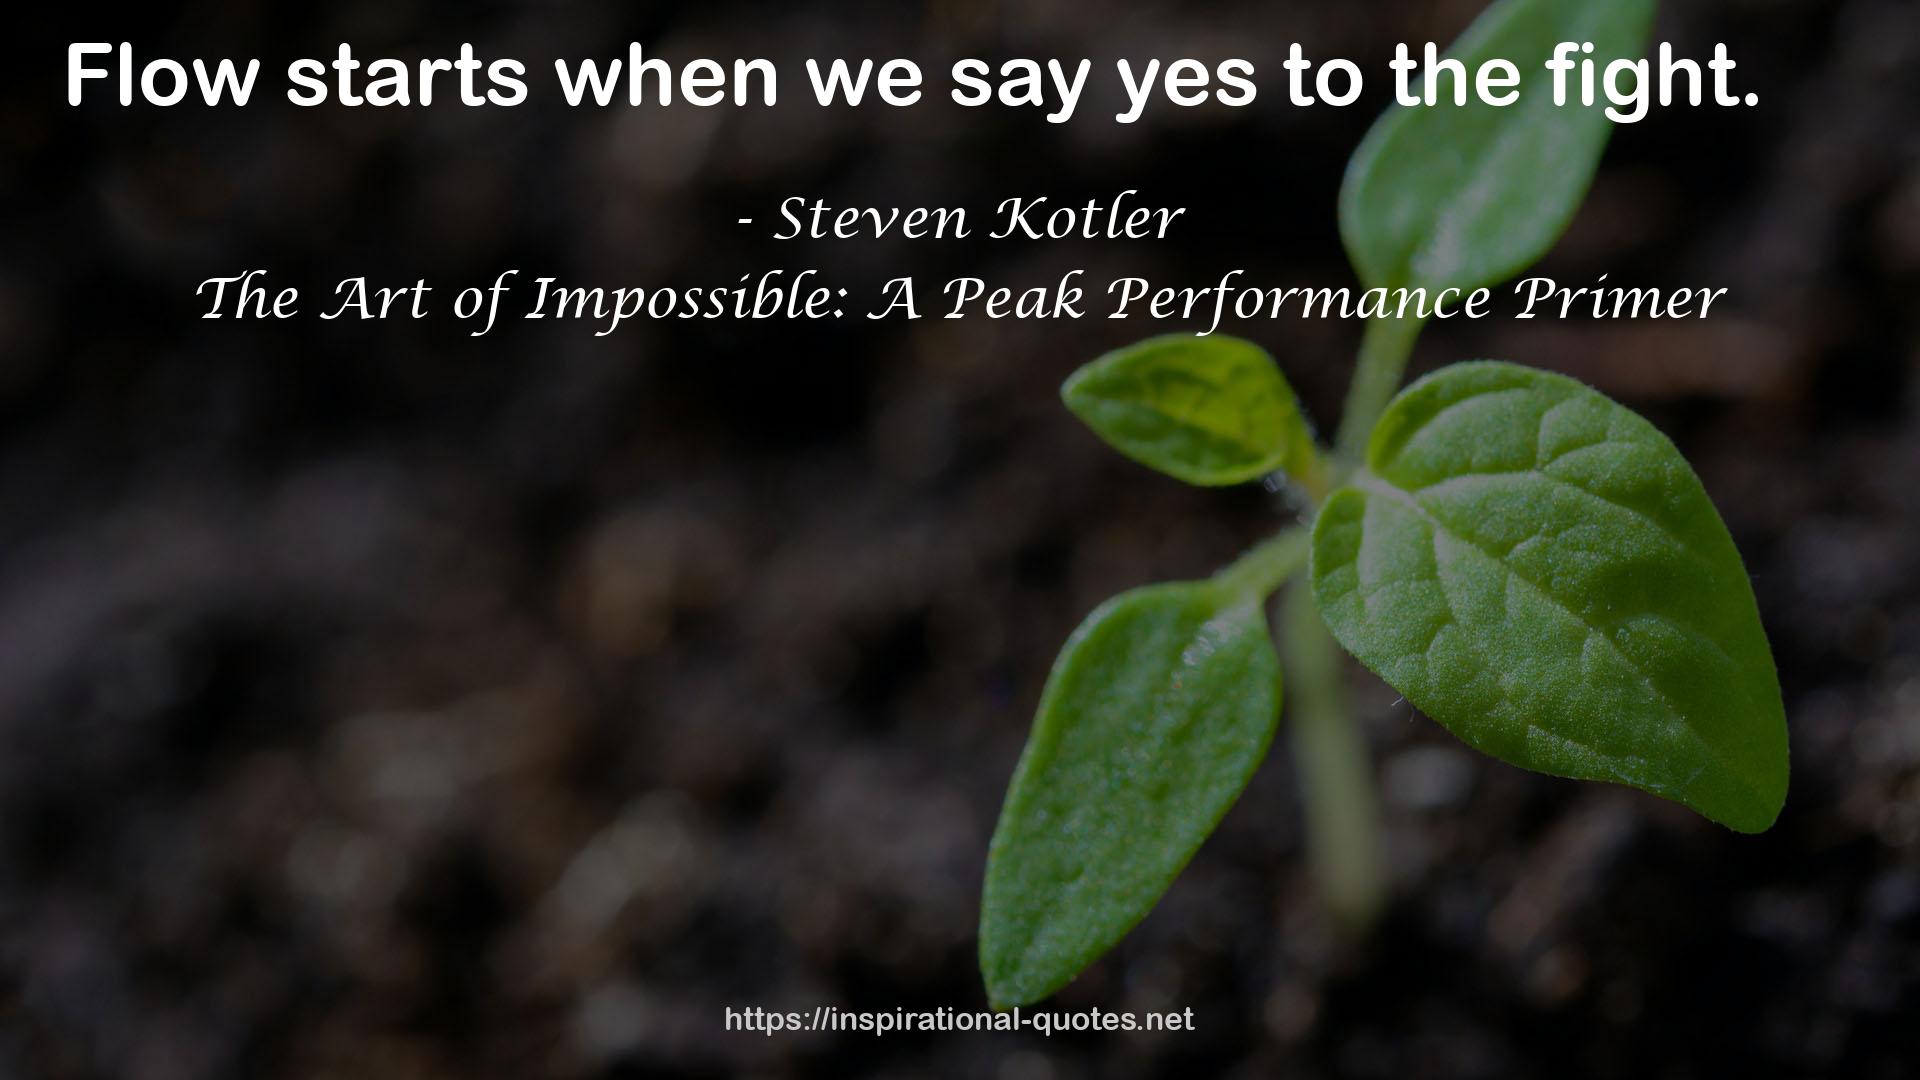 The Art of Impossible: A Peak Performance Primer QUOTES